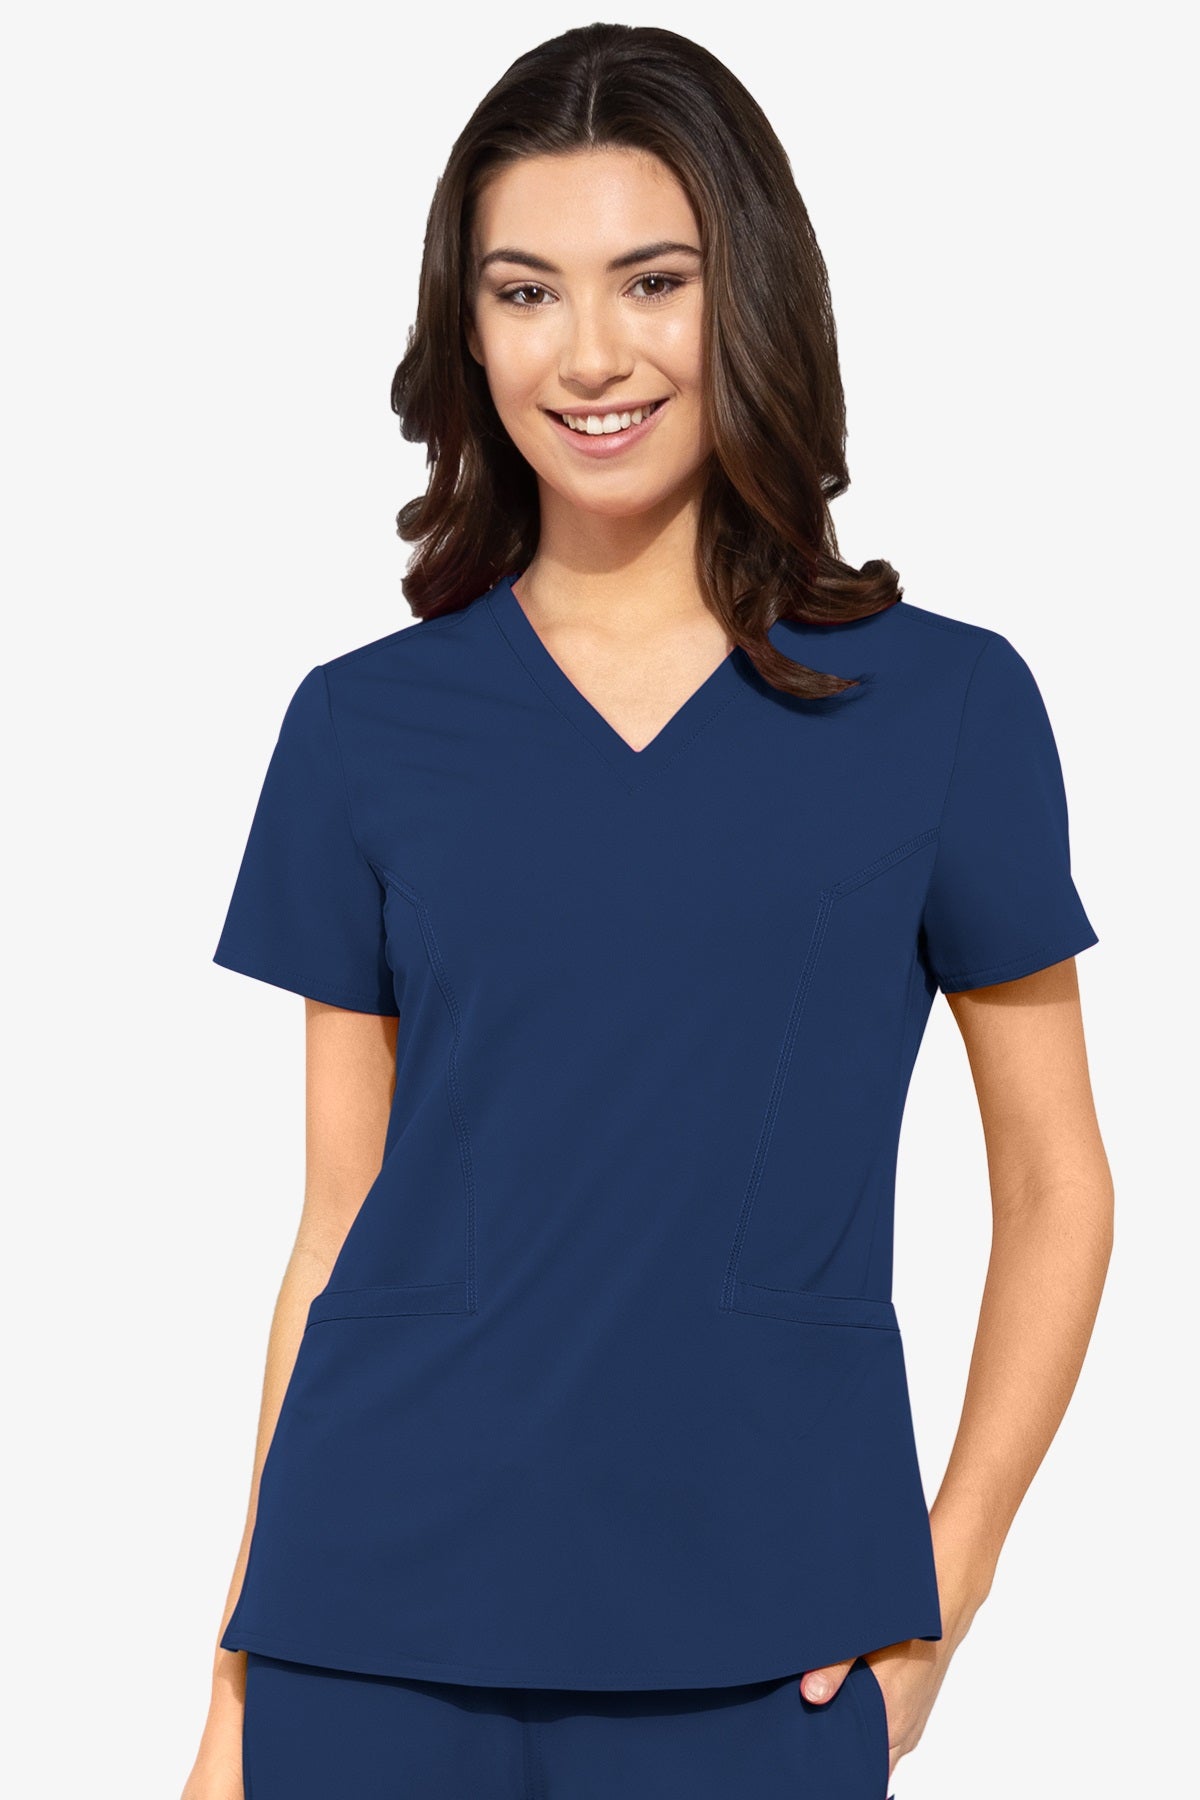 Med Couture Plus Size Scrub Top Peaches Double V-Neck in Navy at Parker's Clothing and Shoes